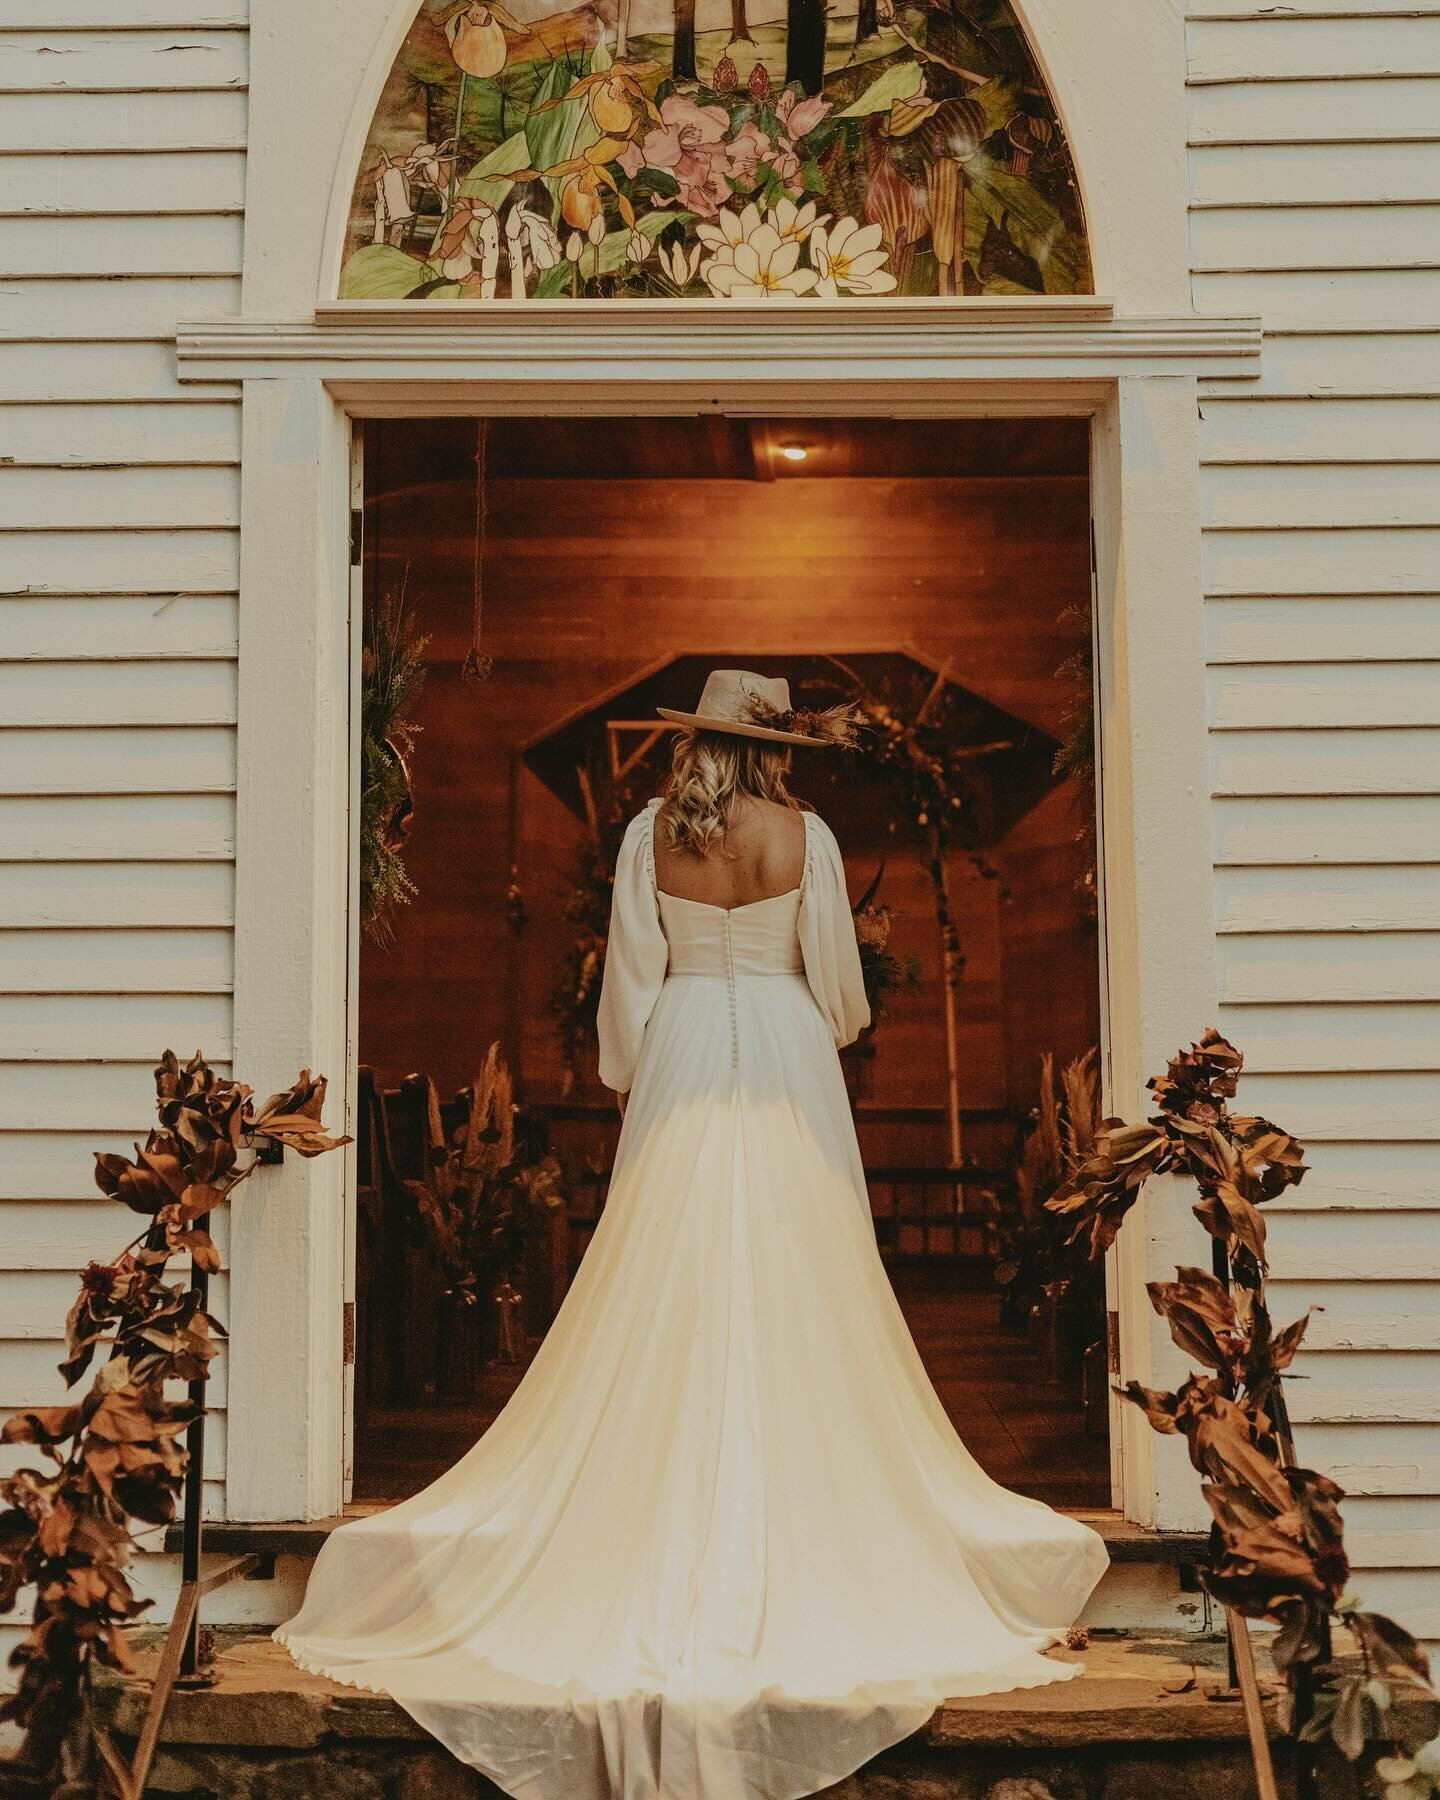 Our dear friend, Sarah, on her wedding day at Orion Chapel. 

This photo by @carolinagypsyco captures the mystic of her natural beauty and style so well. 🍂